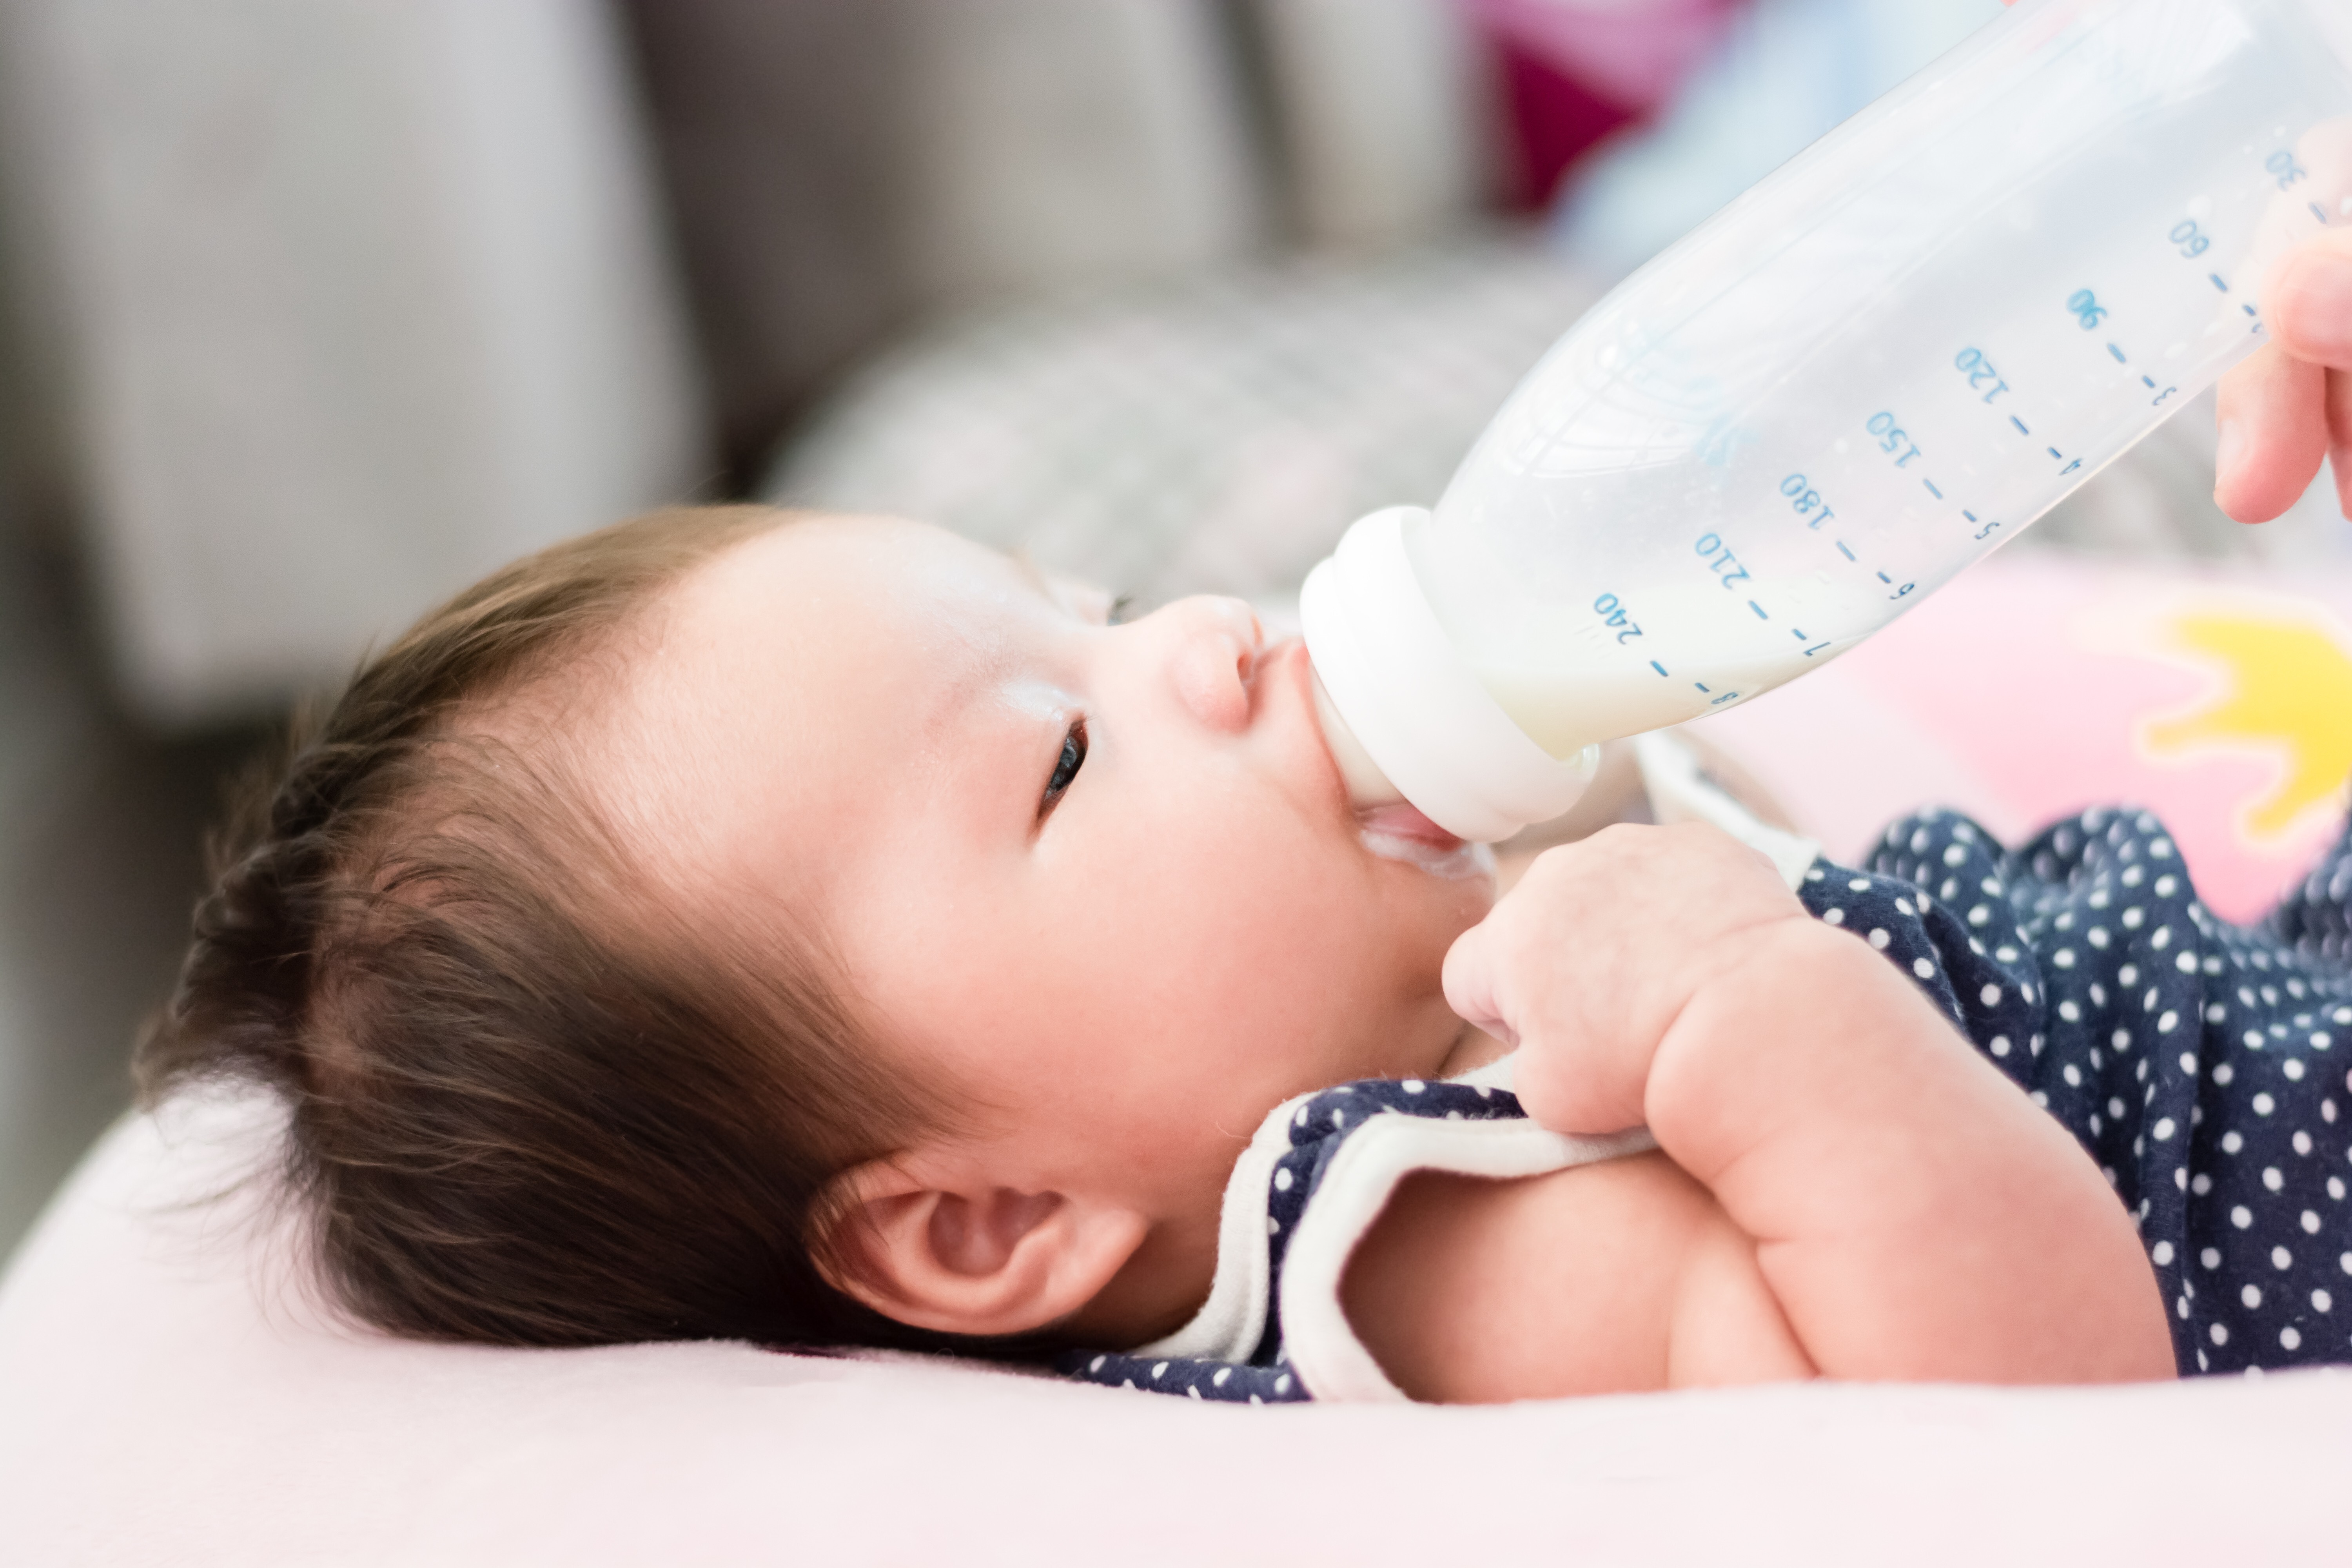 The Consumer Council says six of 15 types of pre-packaged infant formula products reviewed had discrepancies exceeding local food labelling guidelines.